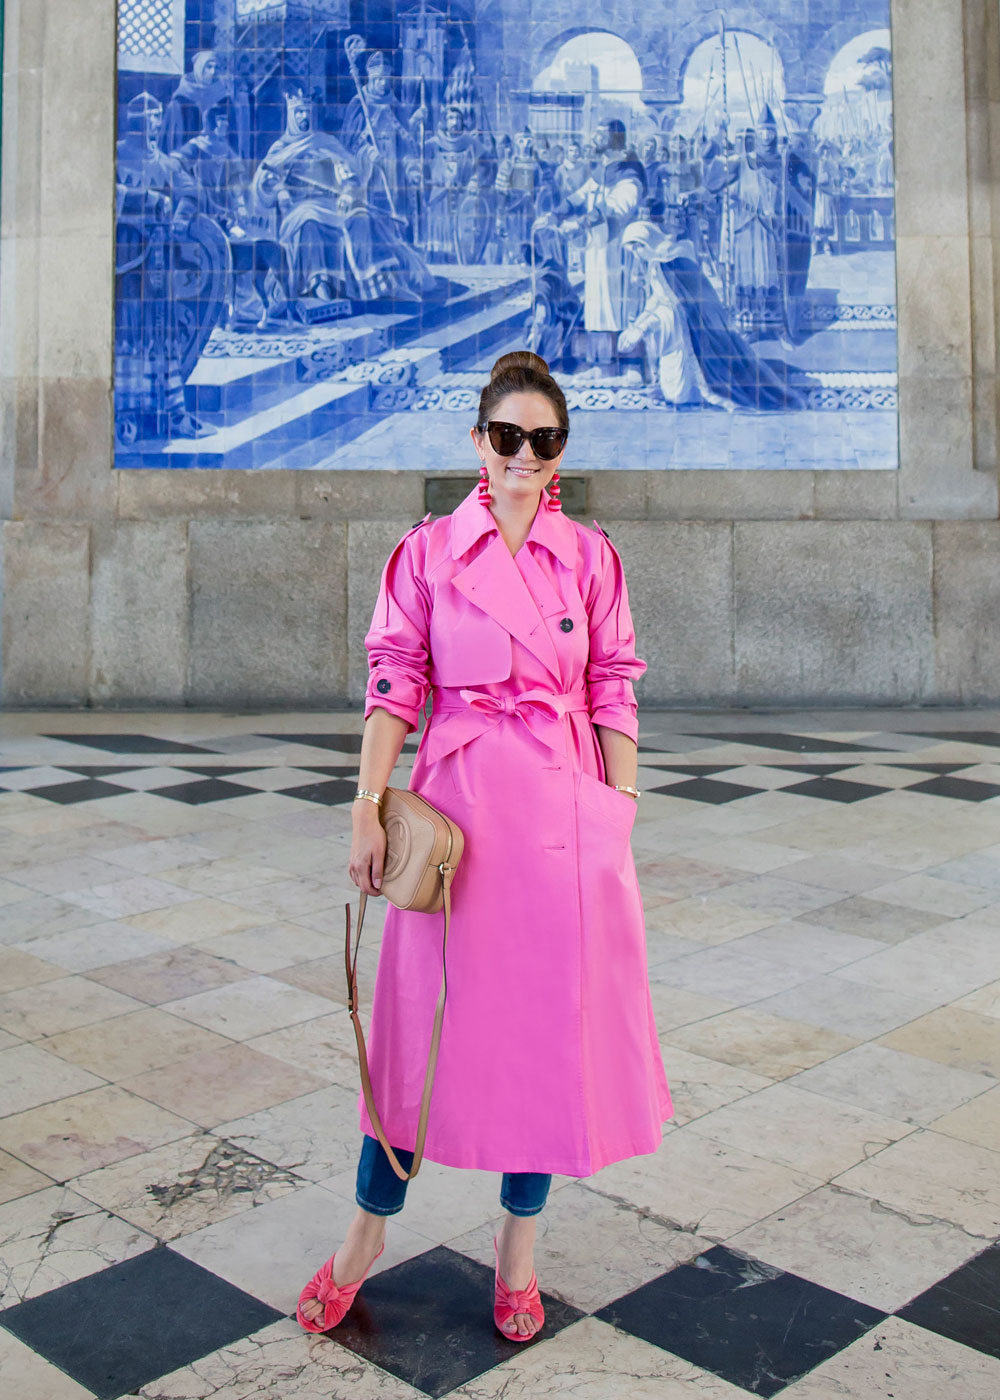 ASOS Bright Pink Trench Coat at the Porto Train Station